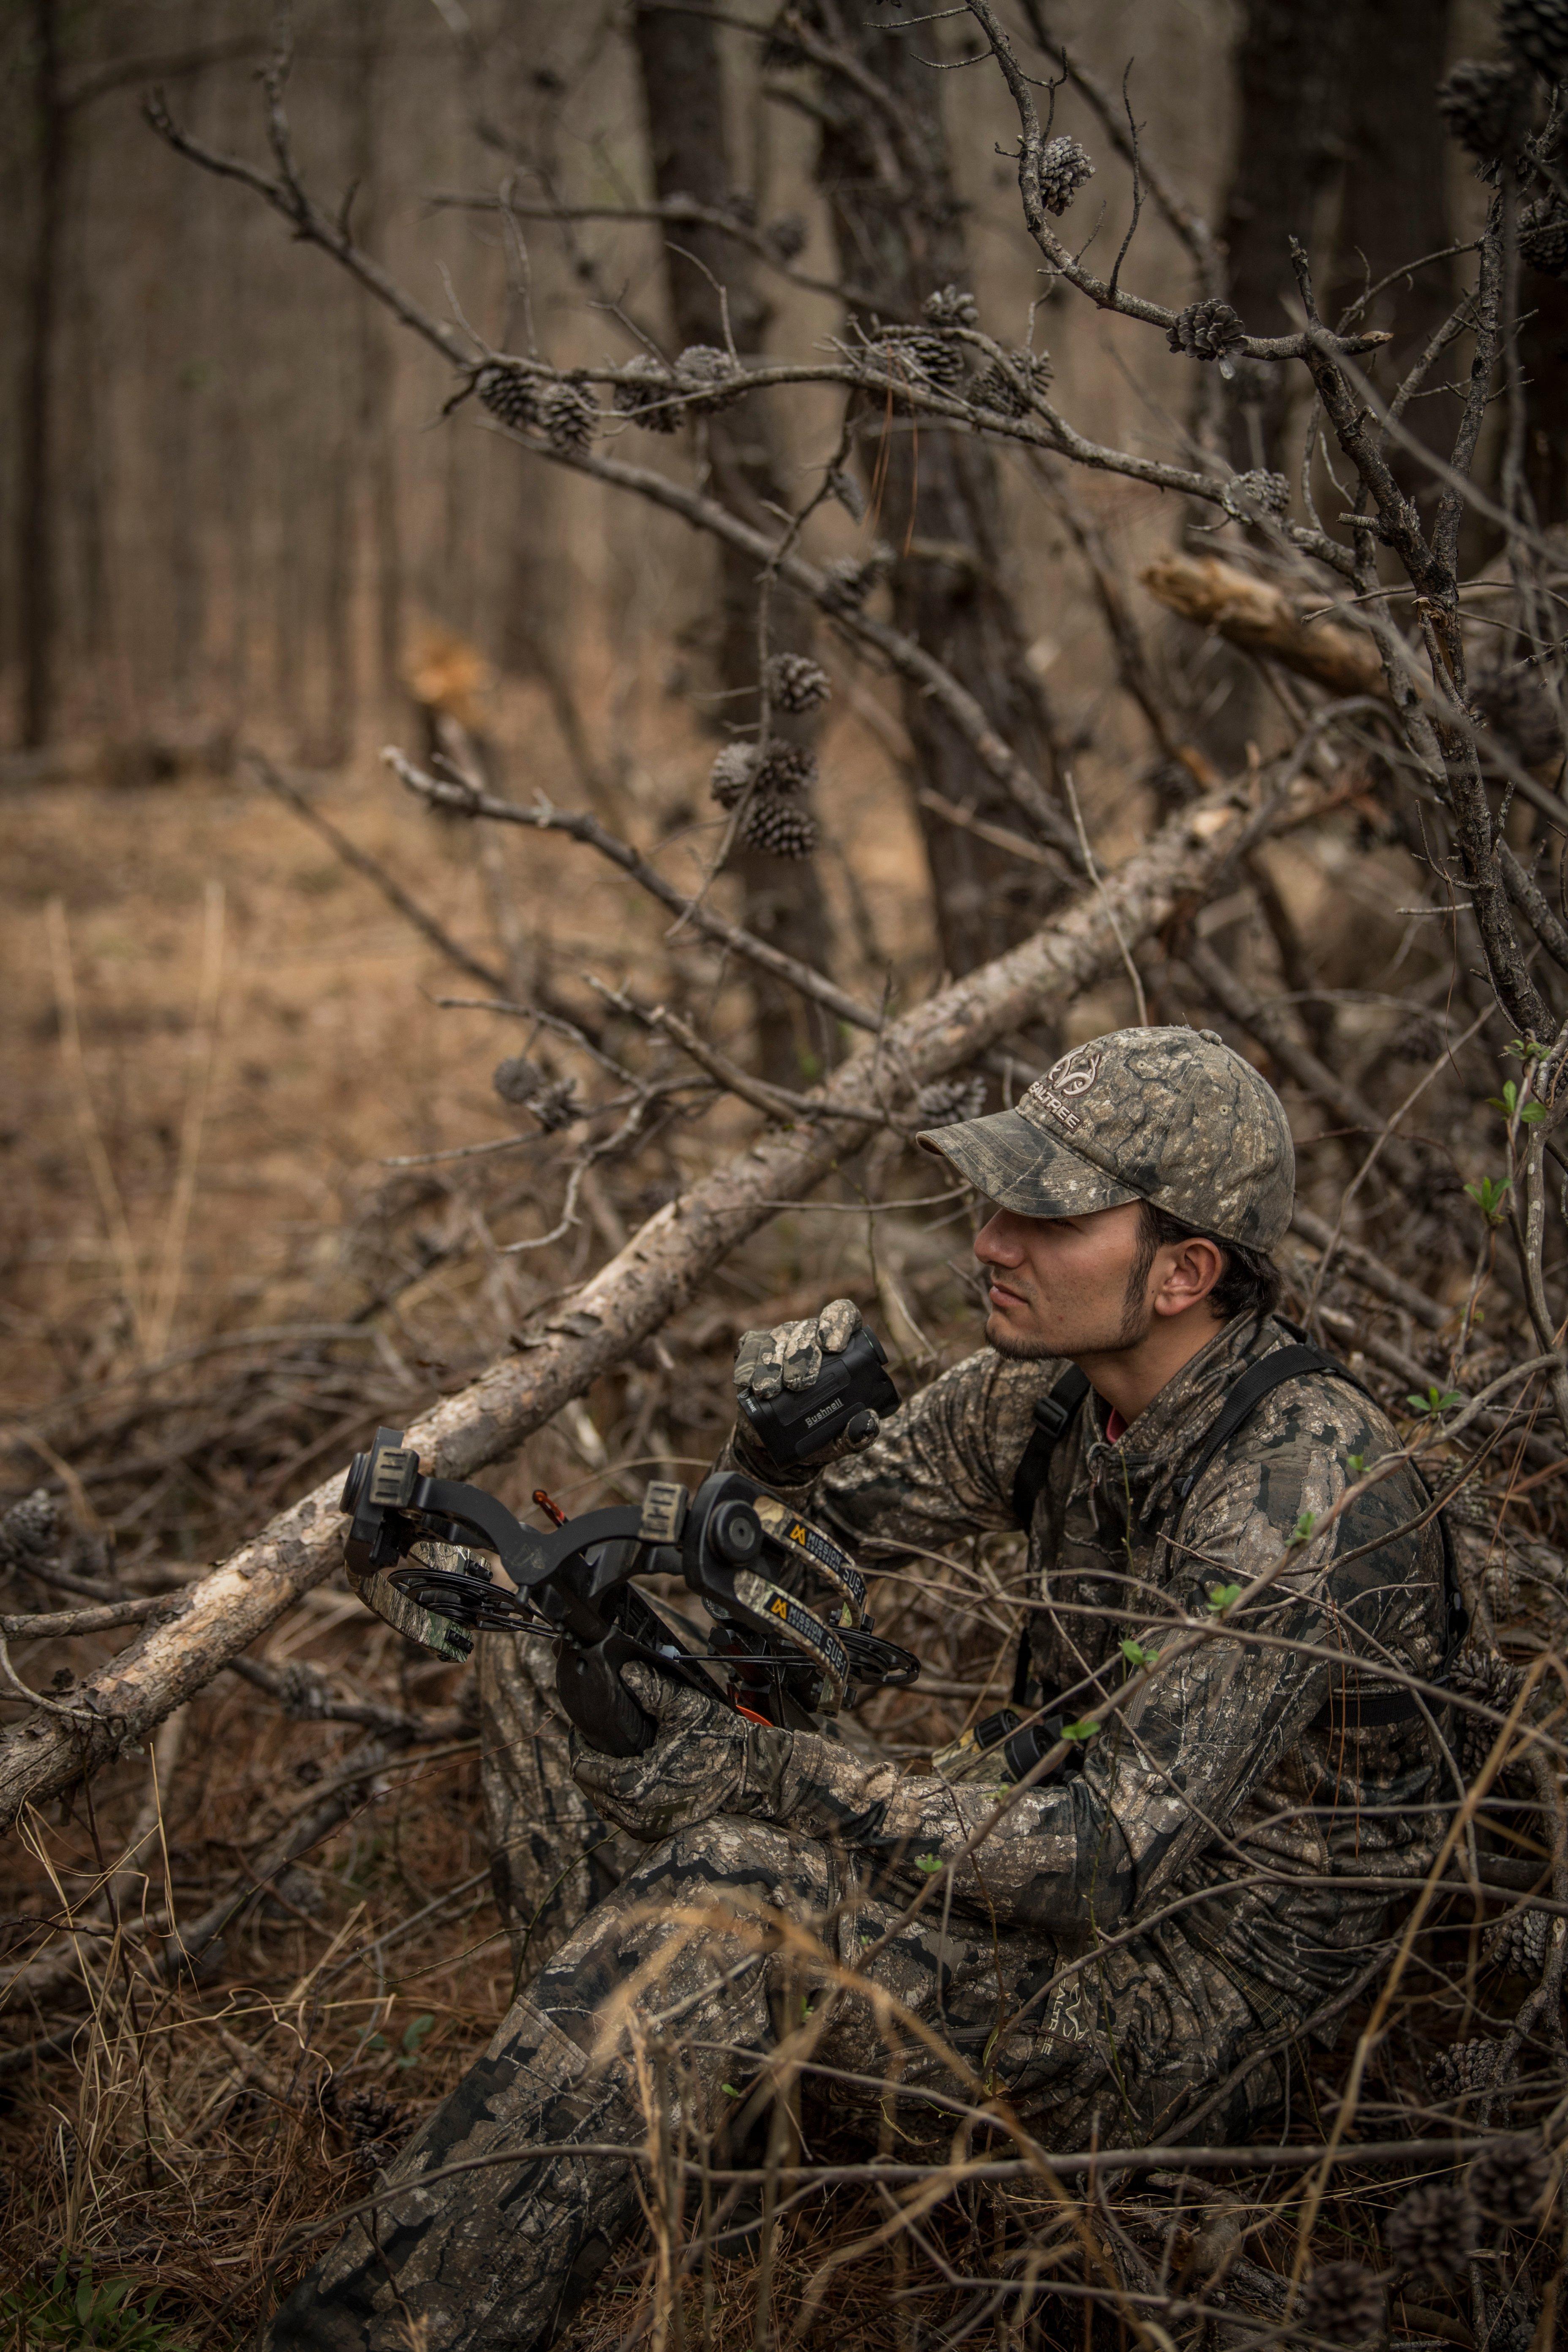 Those who hunt public land should leave as little sign behind as possible, even if that means hunting from the ground. Image by Realtree Media